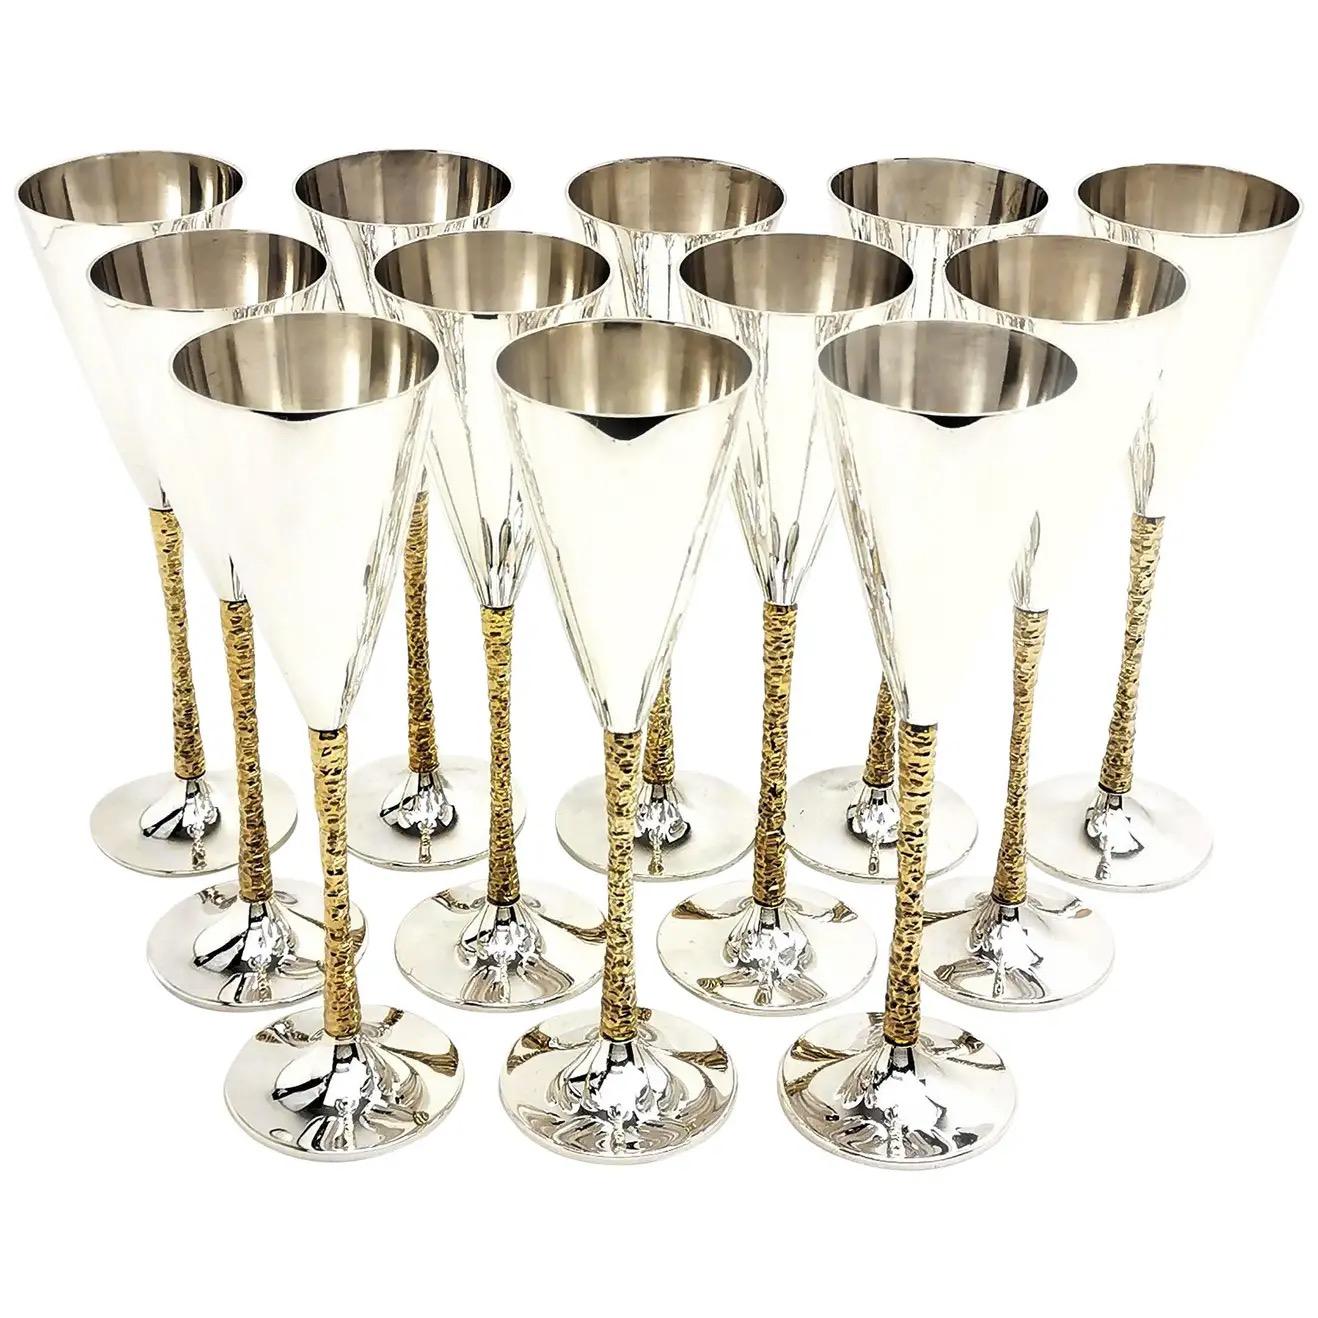 Introducing an exquisite collection of twenty-eight English parcel-gilt silver champagne flutes, masterfully crafted by the renowned Stuart Devlin in London between 1977 and 1981. Each flute bears distinctive markings on its base, denoting its